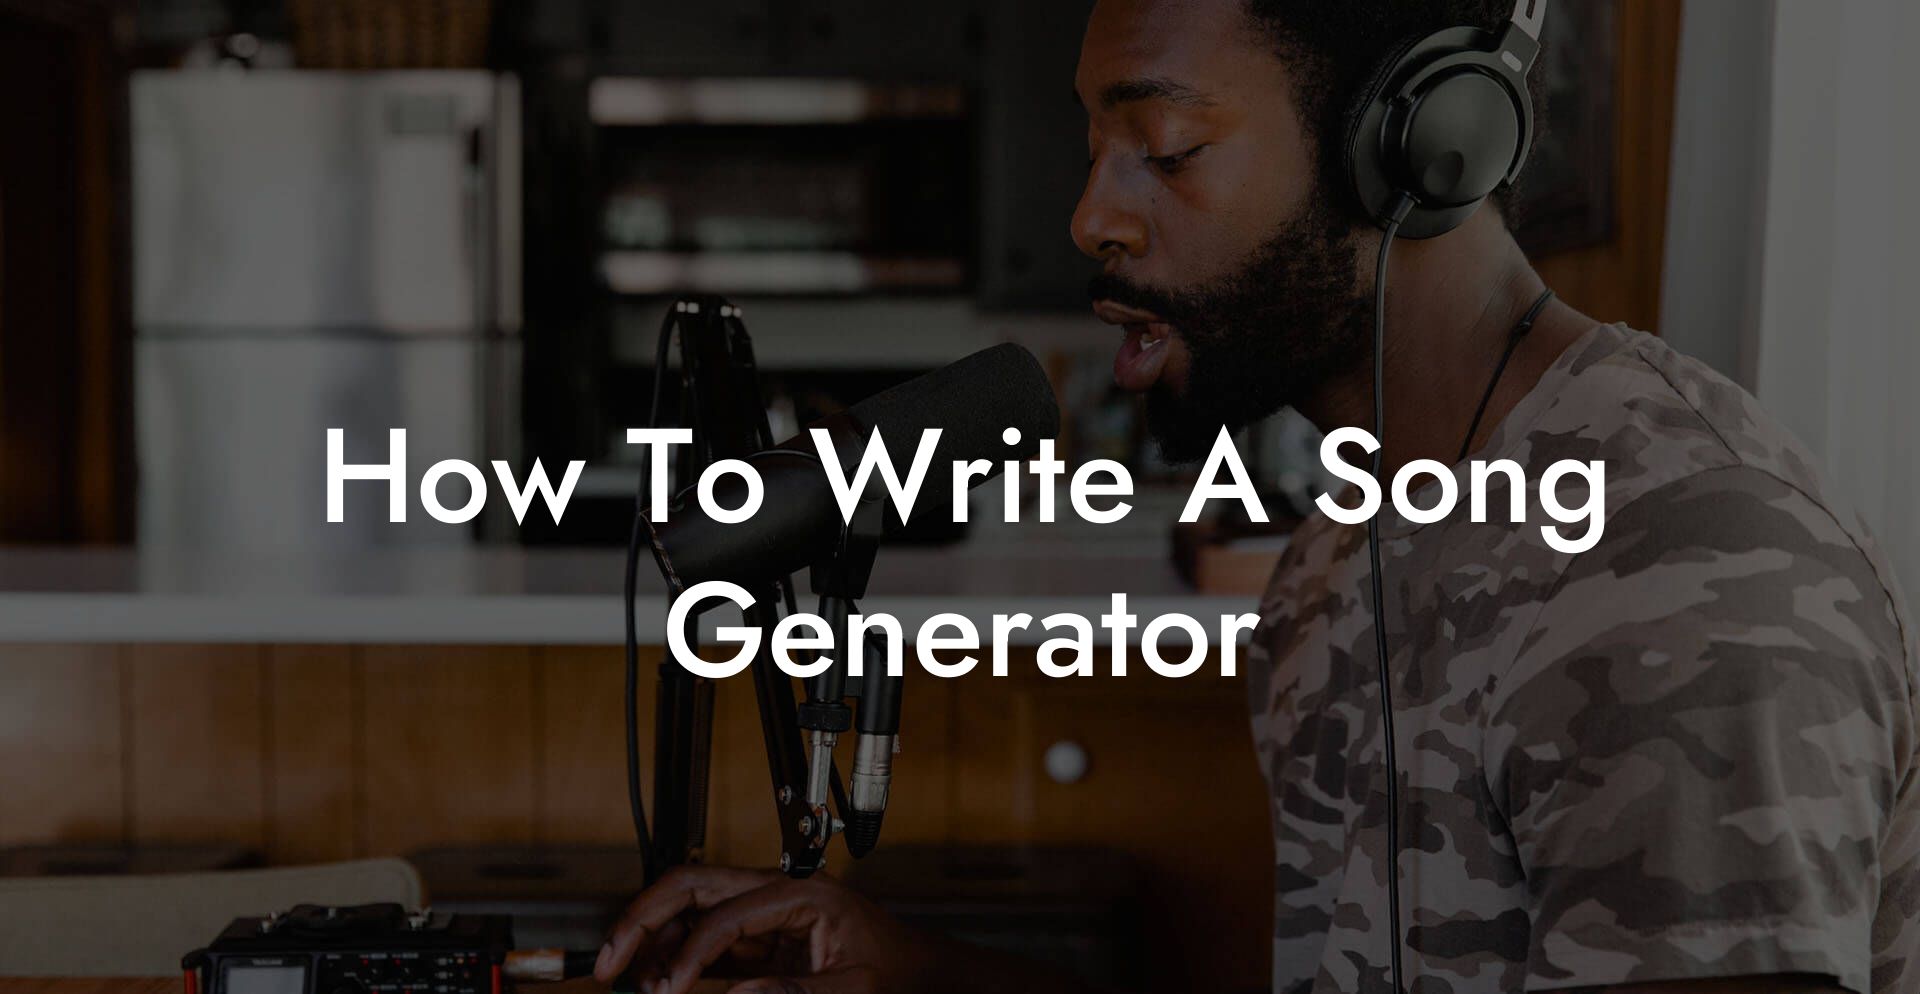 how to write a song generator lyric assistant